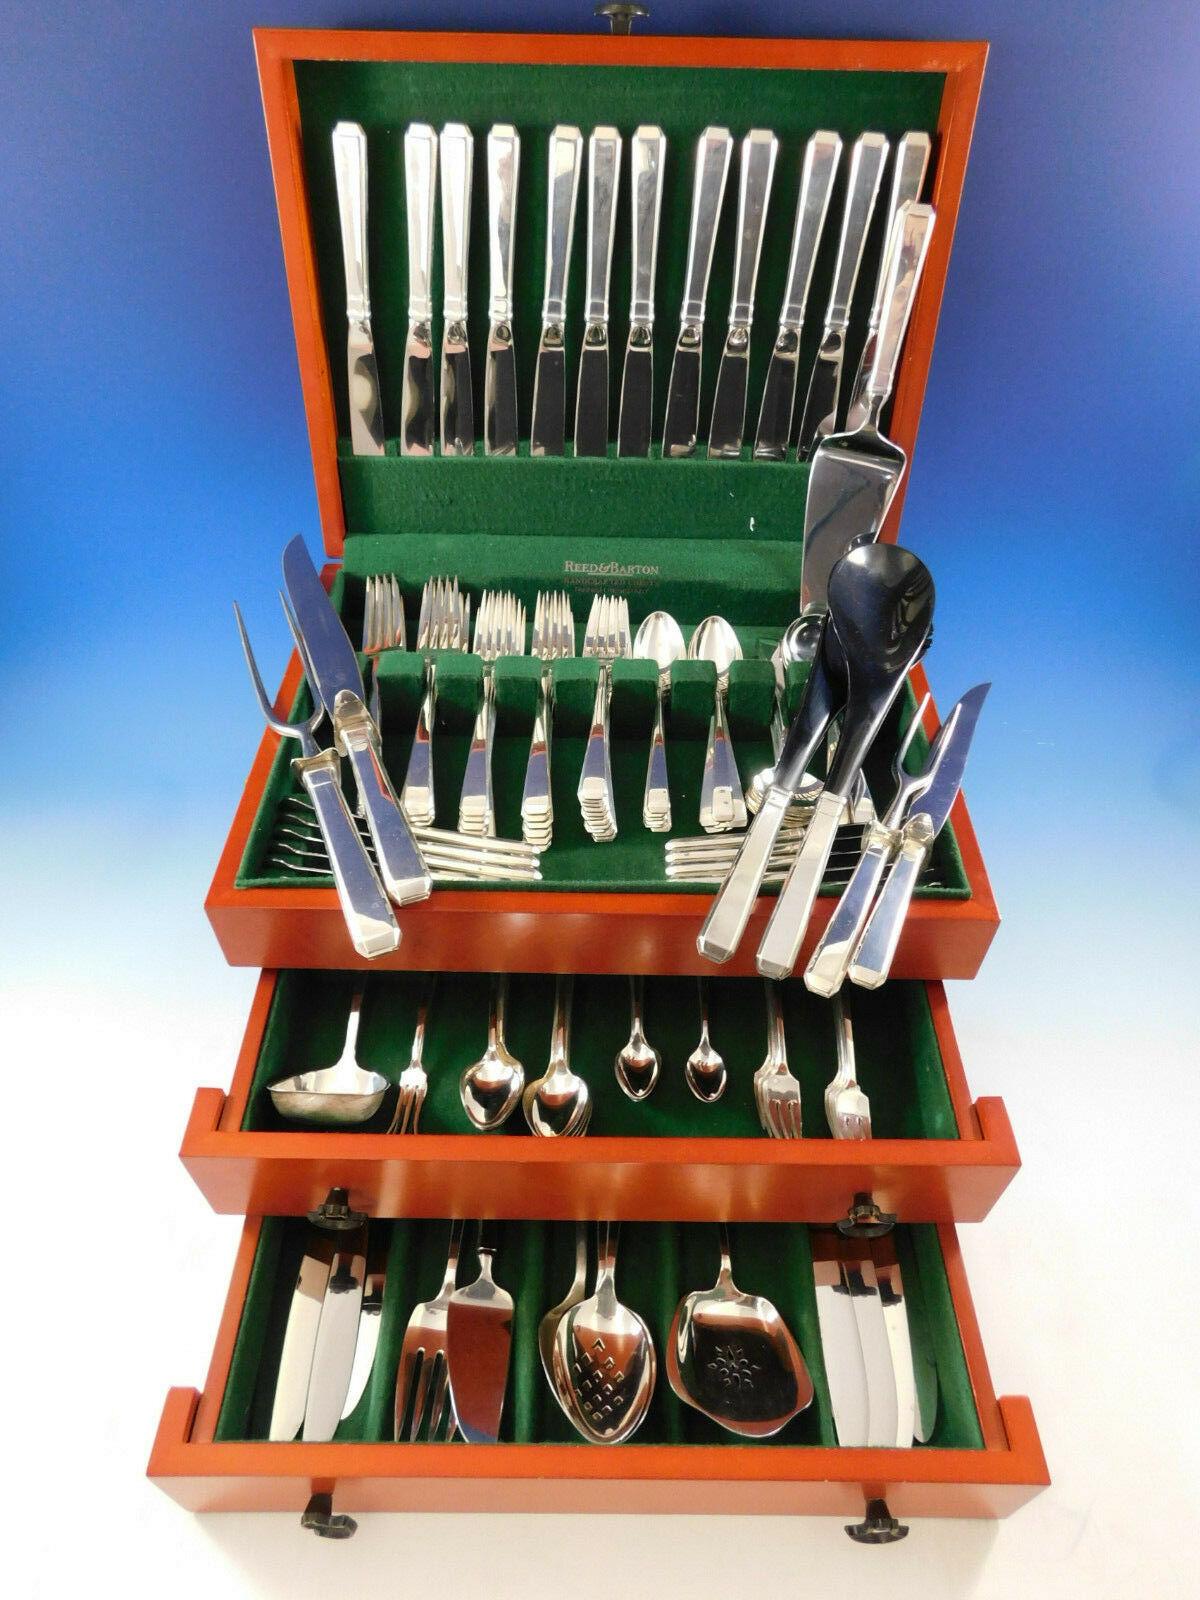 Monumental dinner and Luncheon craftsman by Towle sterling silver flatware set, 148 pieces. This set includes:

Measures: 12 dinner size knives, 9 1/2